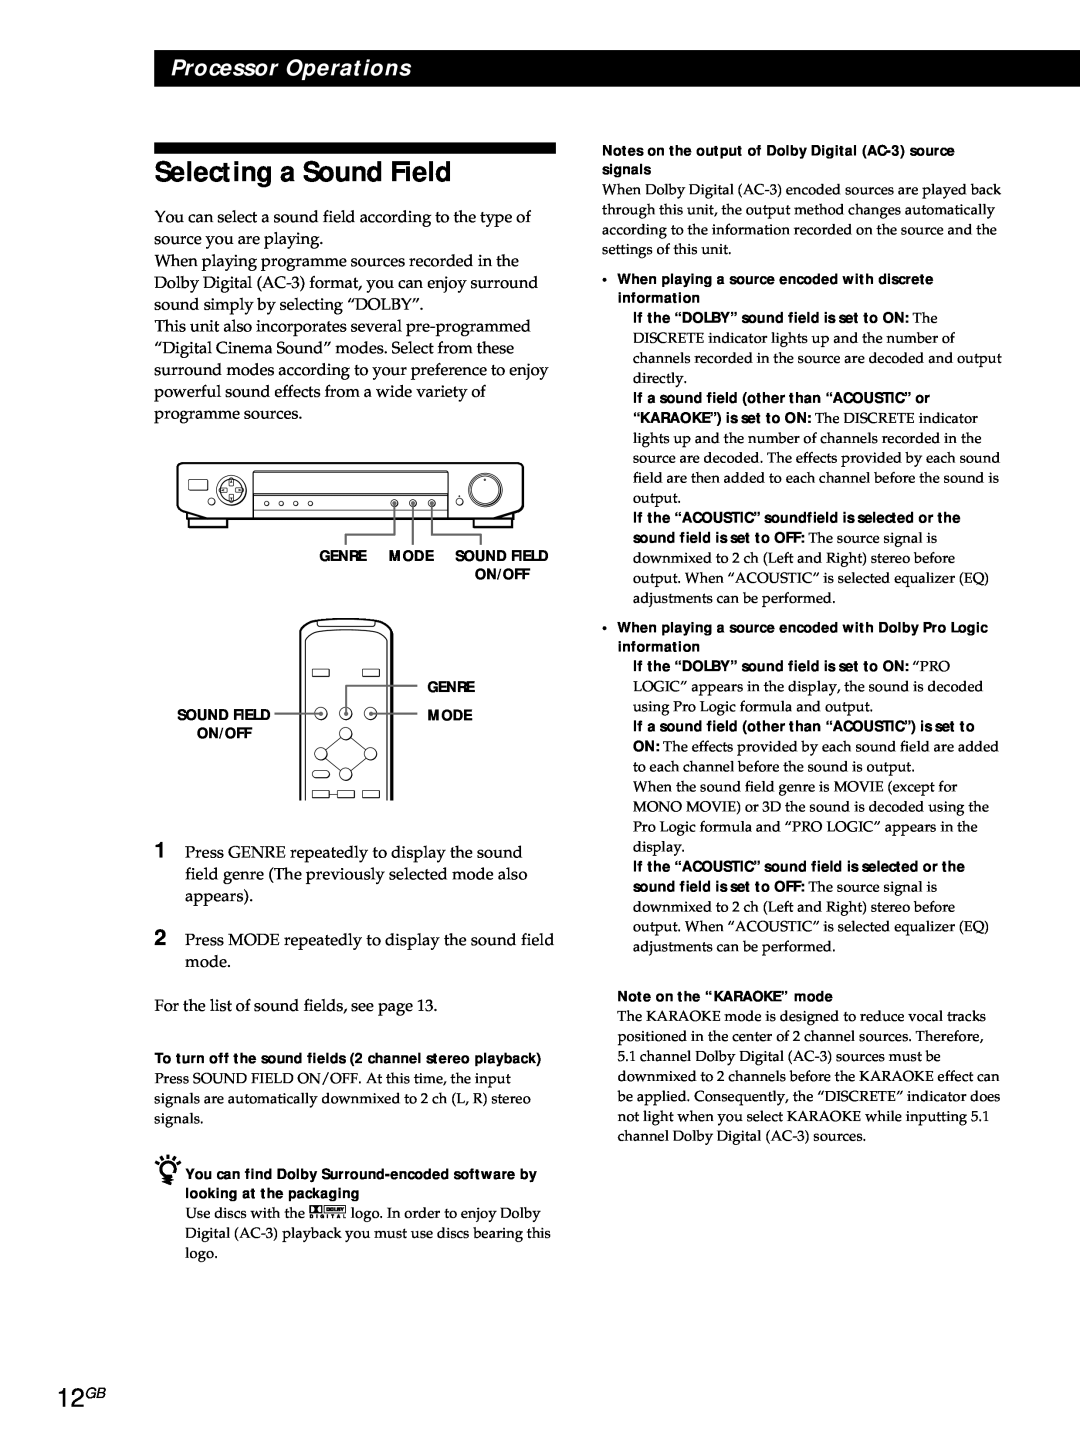 Sony SDP-E800 operating instructions Selecting a Sound Field, 12GB, Processor Operations 